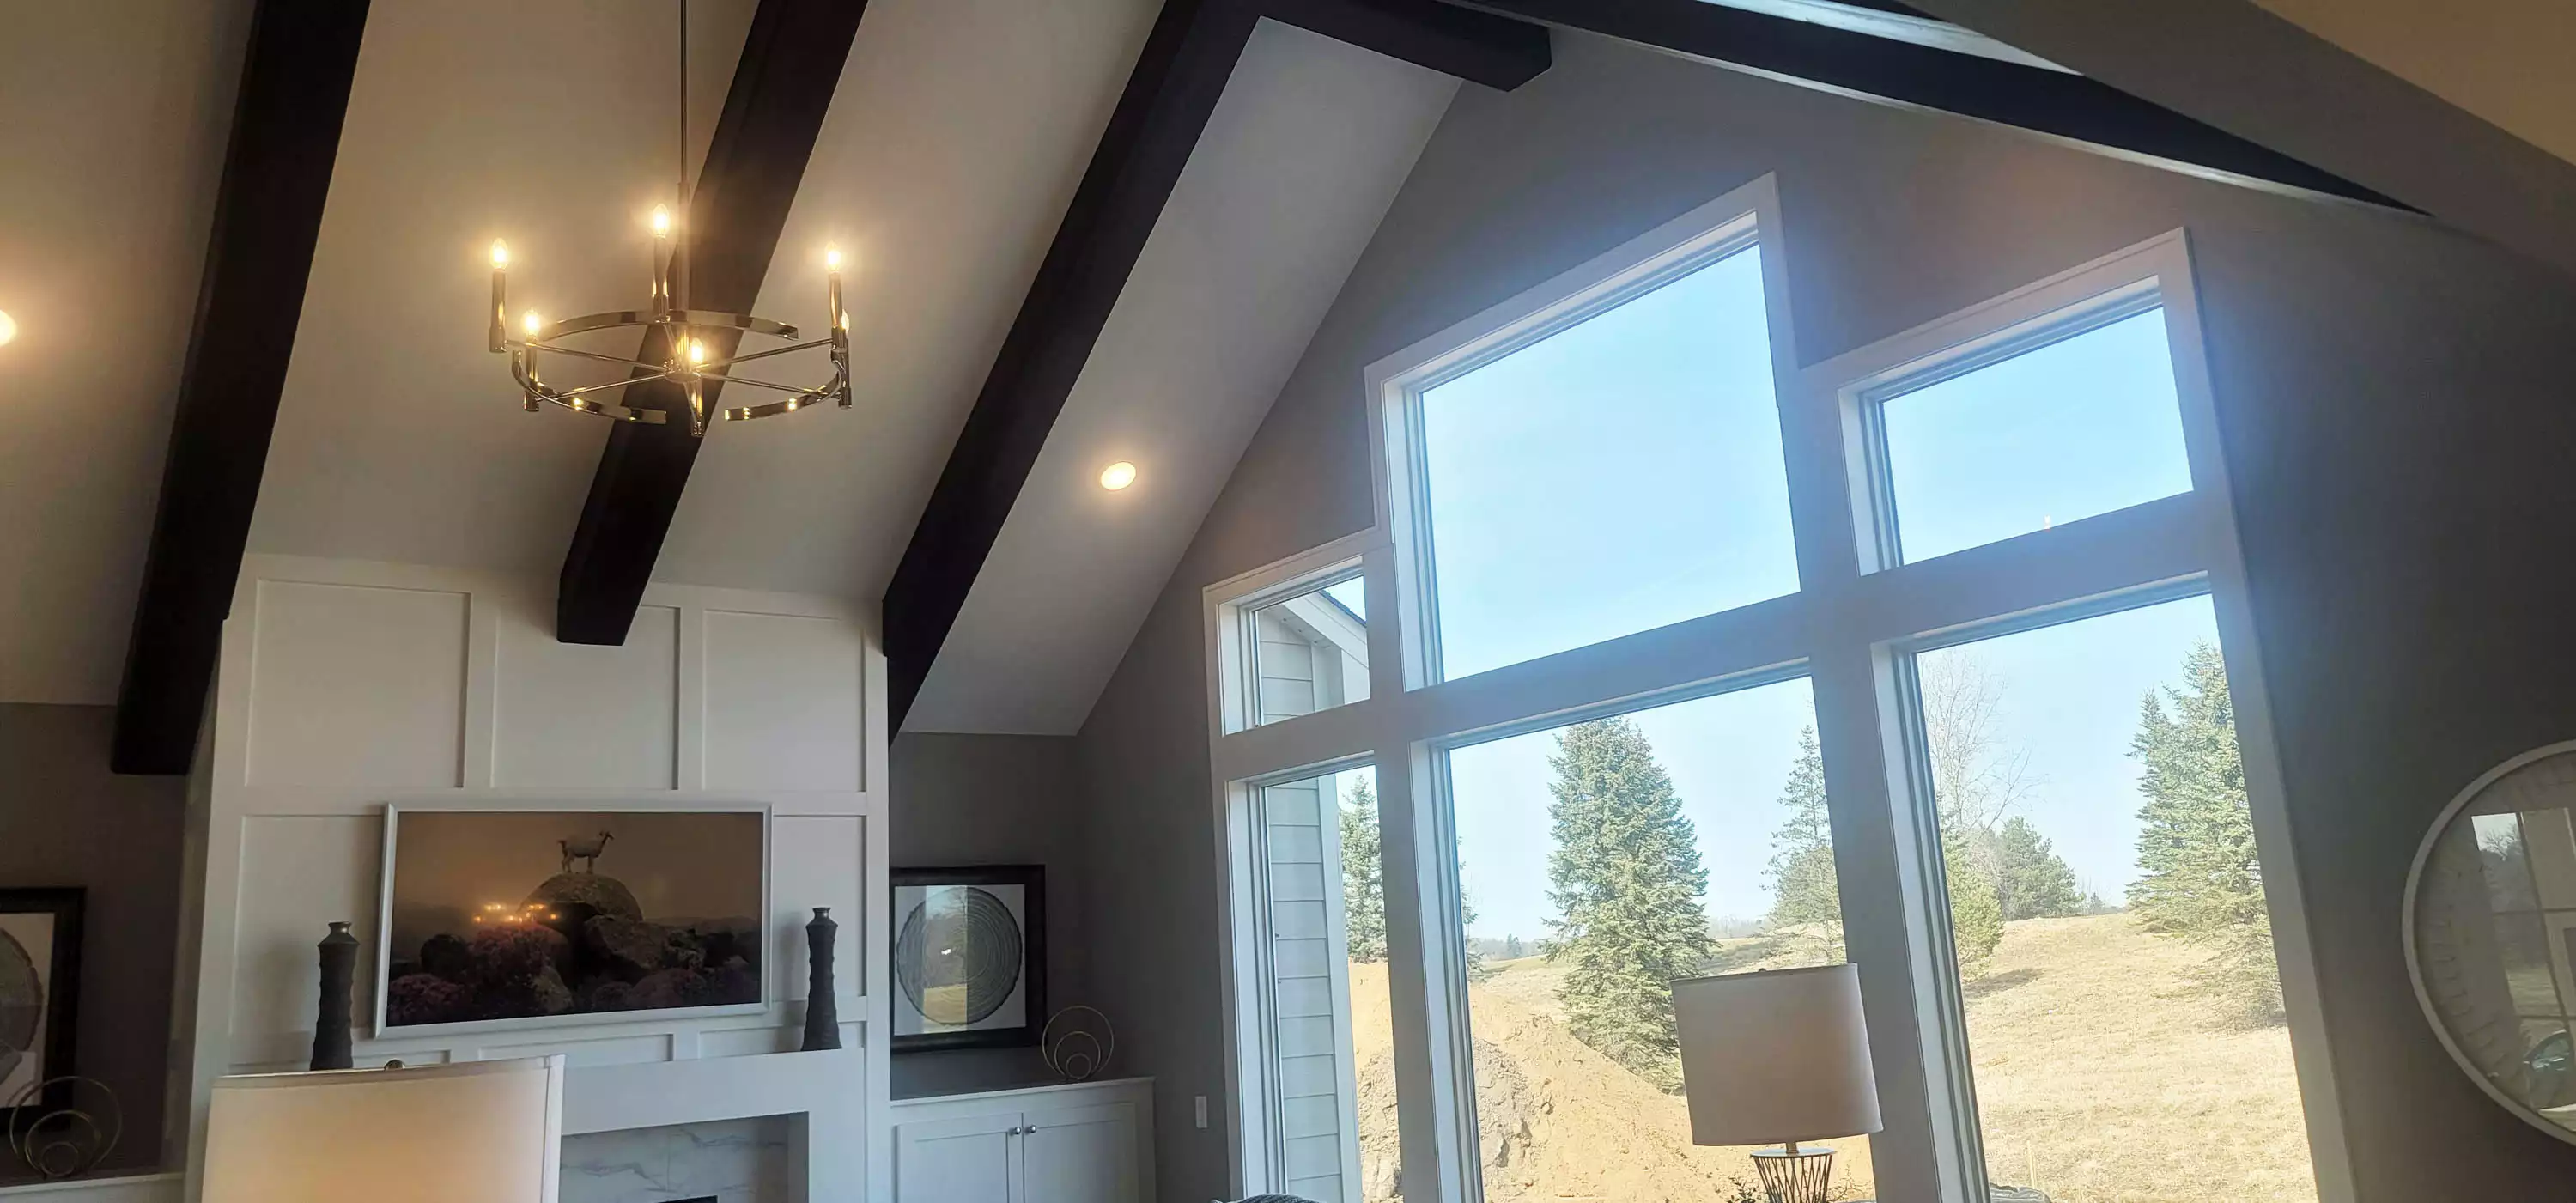 Exciting ceiling detailing beams